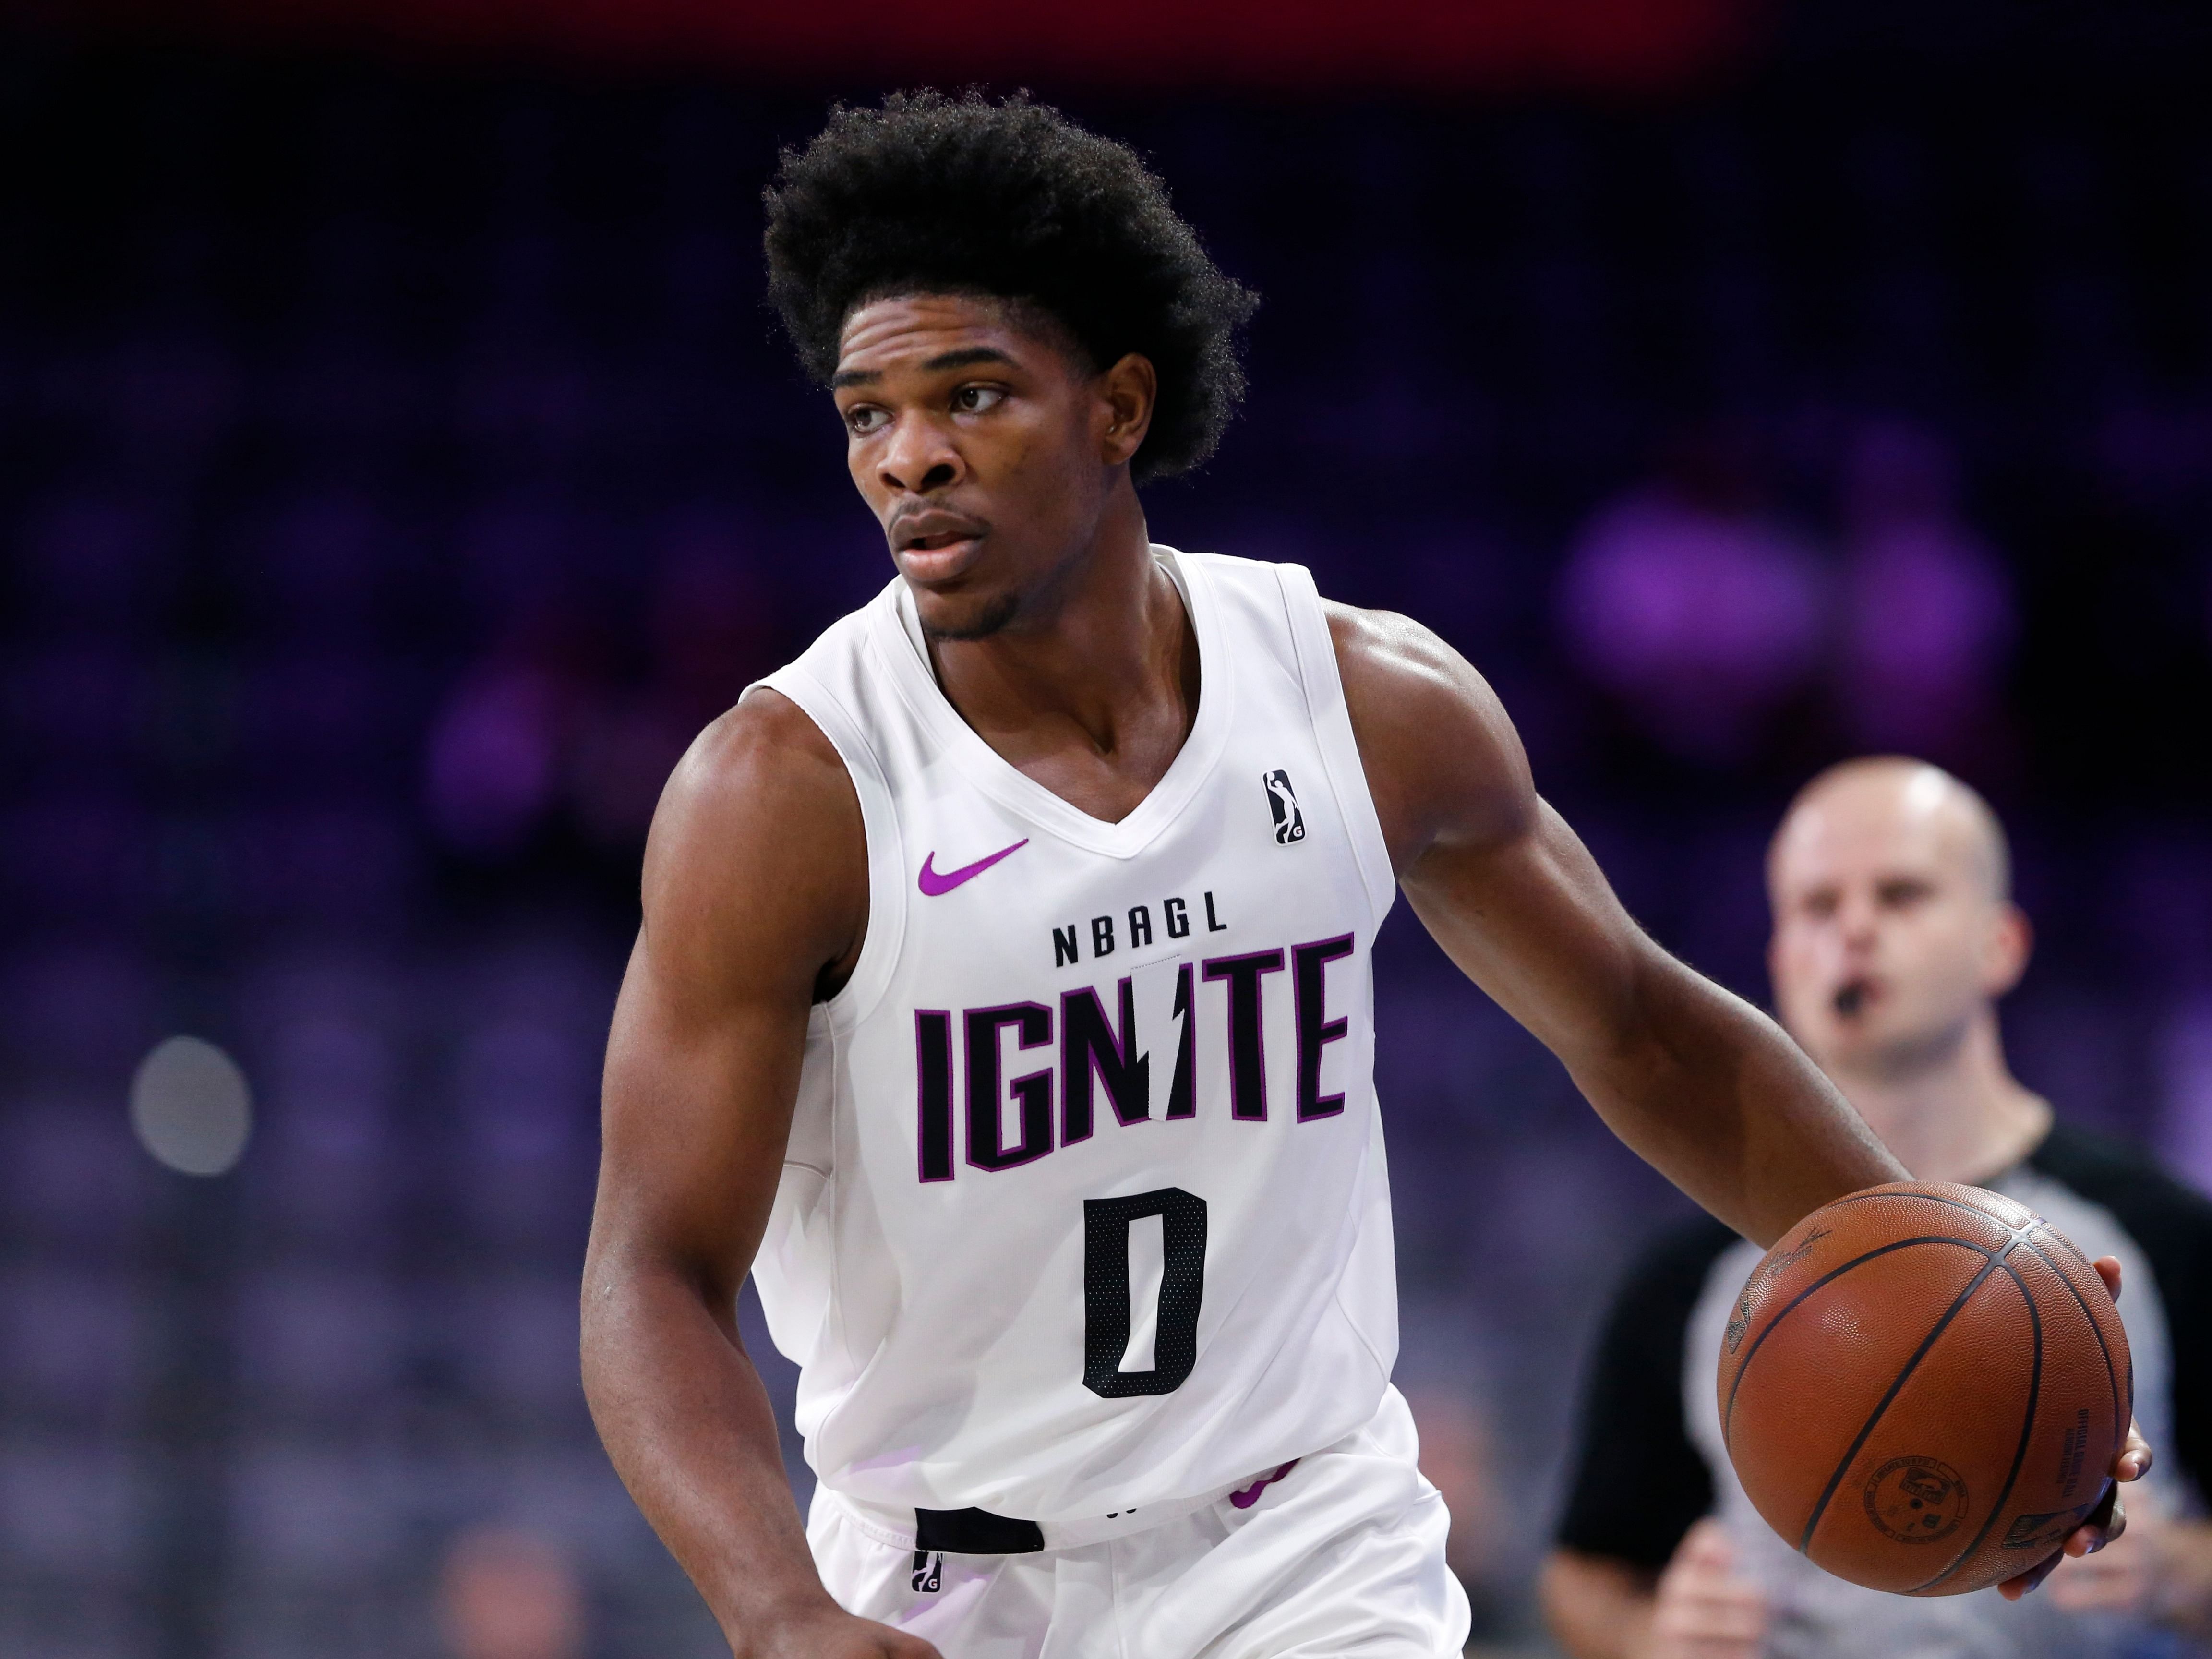 Sources: G-League will pay Jalen Green $500,000 for one year